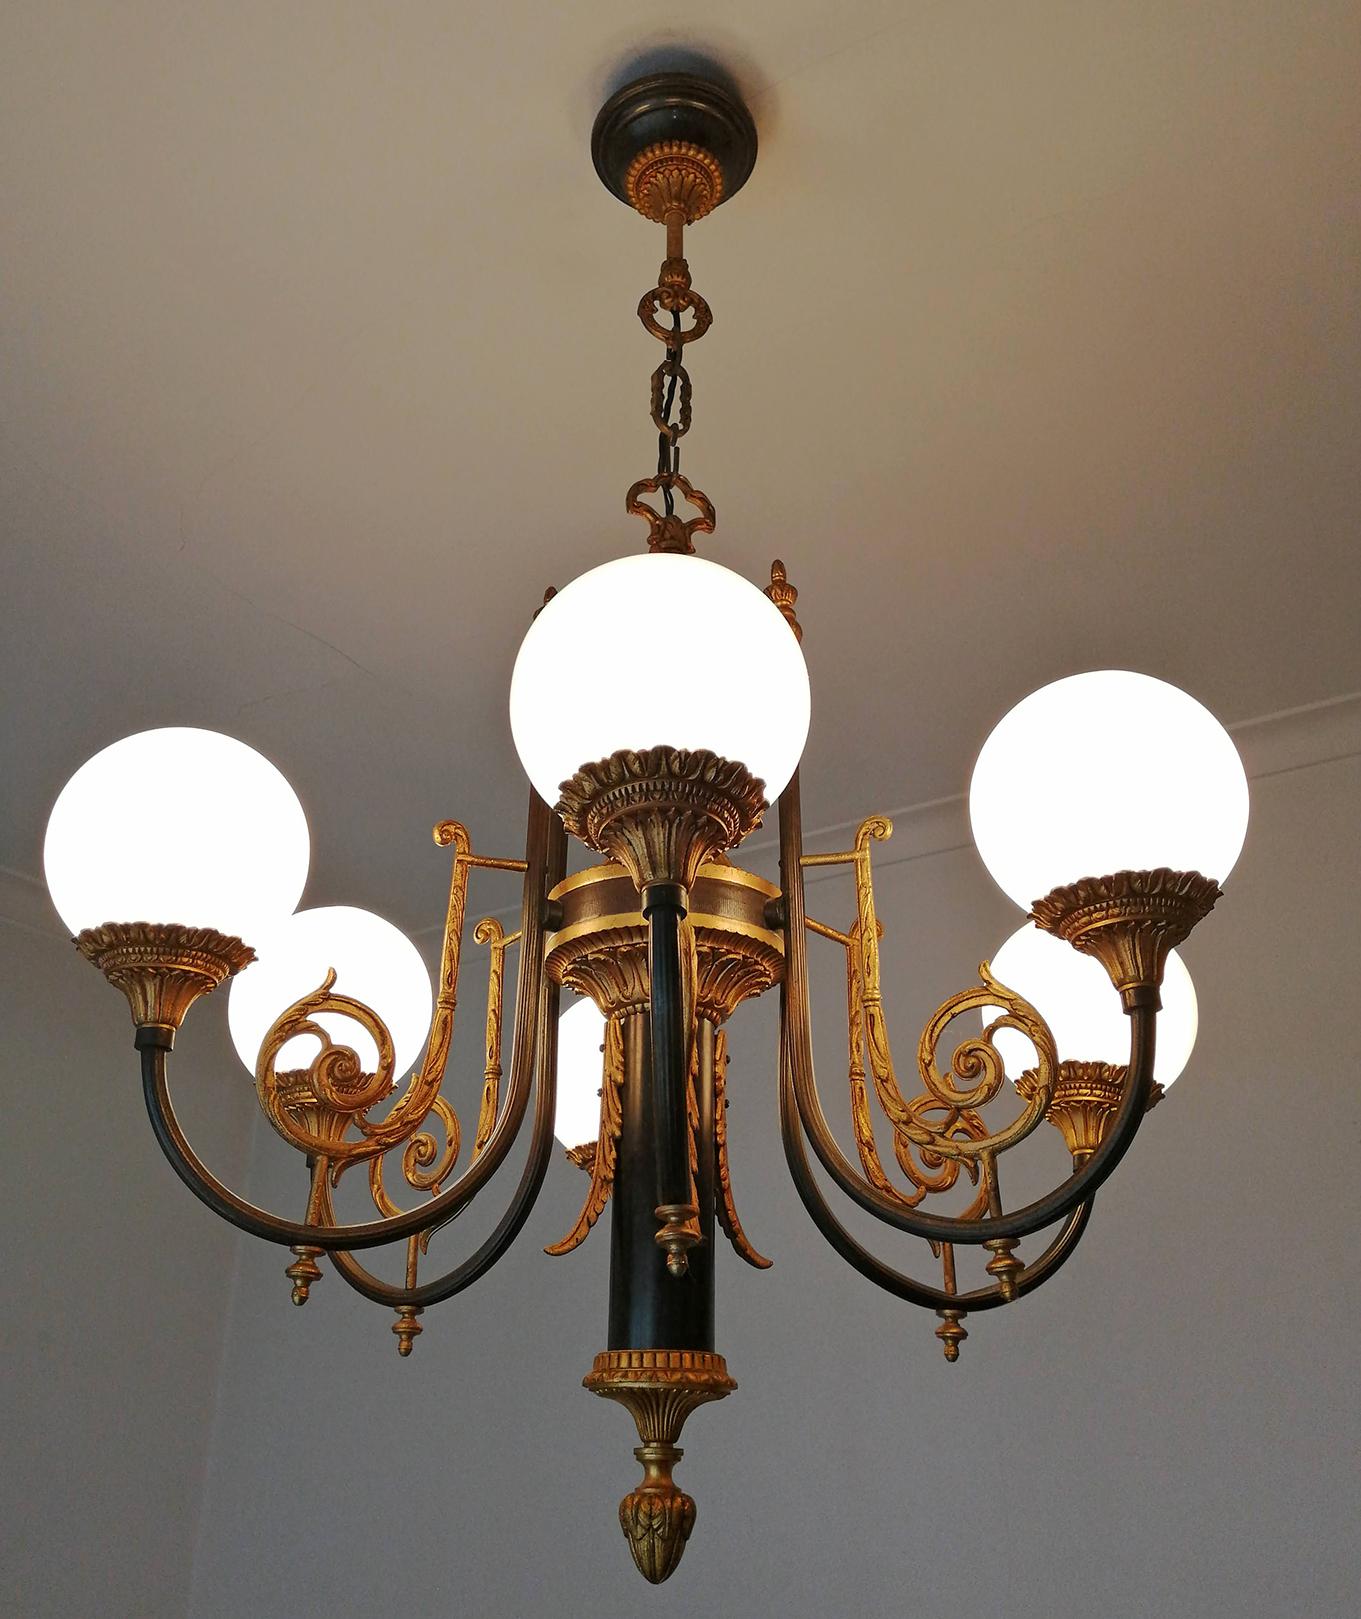 Antique French Empire Neoclassical Gilt & Patina Bronze Opaline Globe Chandelier For Sale 6